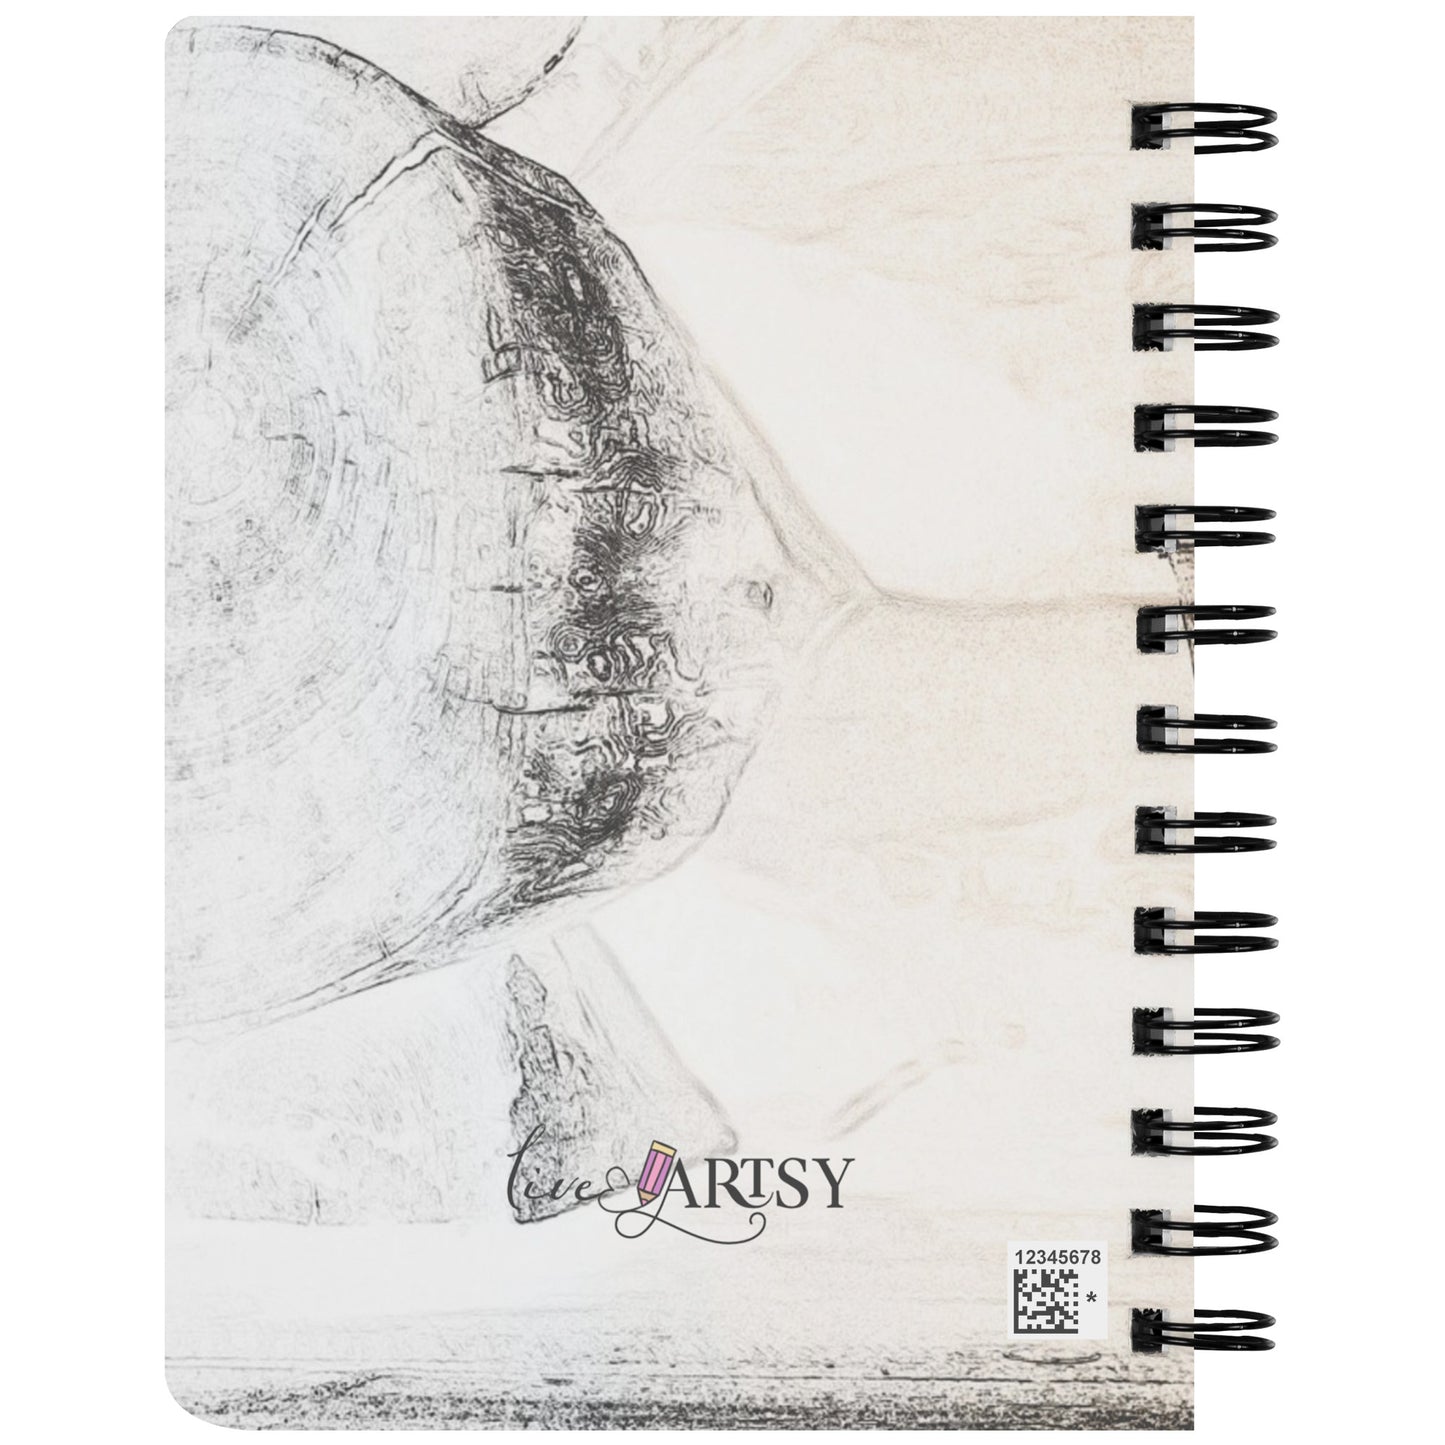 Stay Humble Spiral Journal Notebook